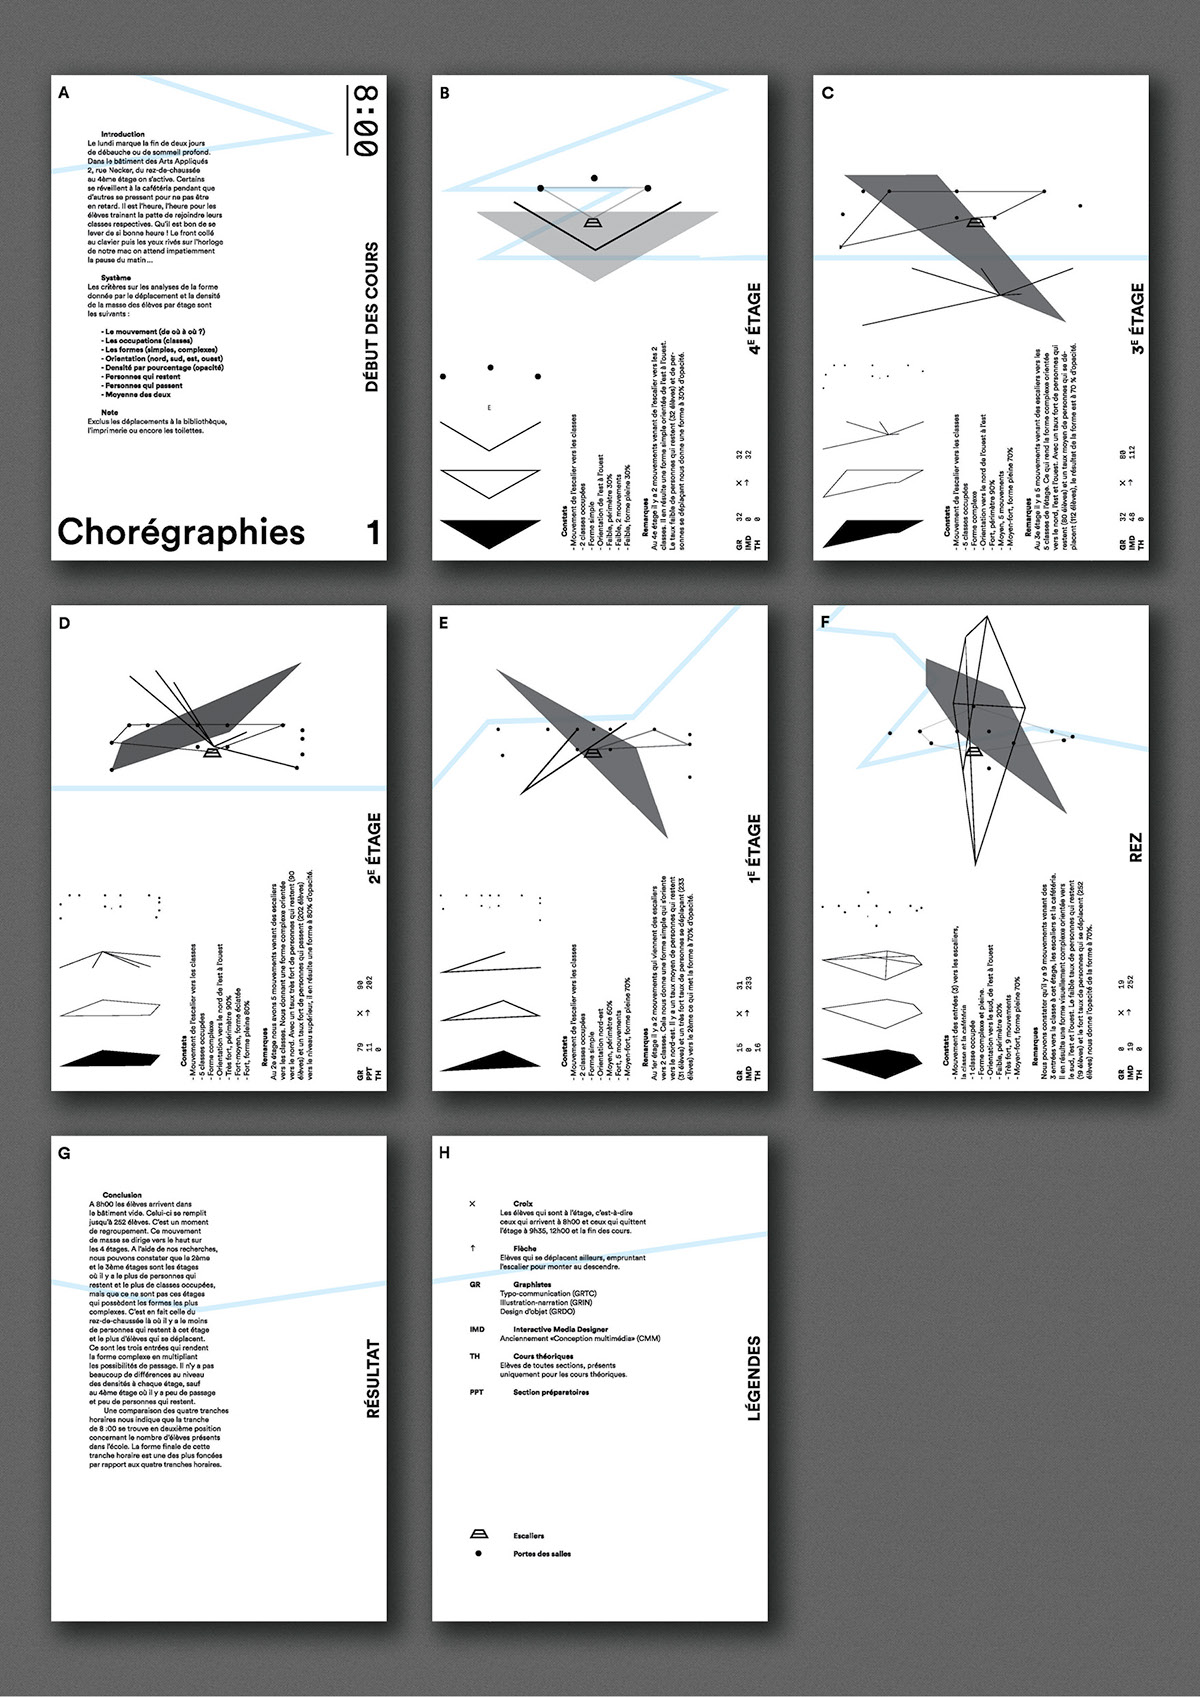 choregraphy inventory cfpaa movements Geometrical shapes